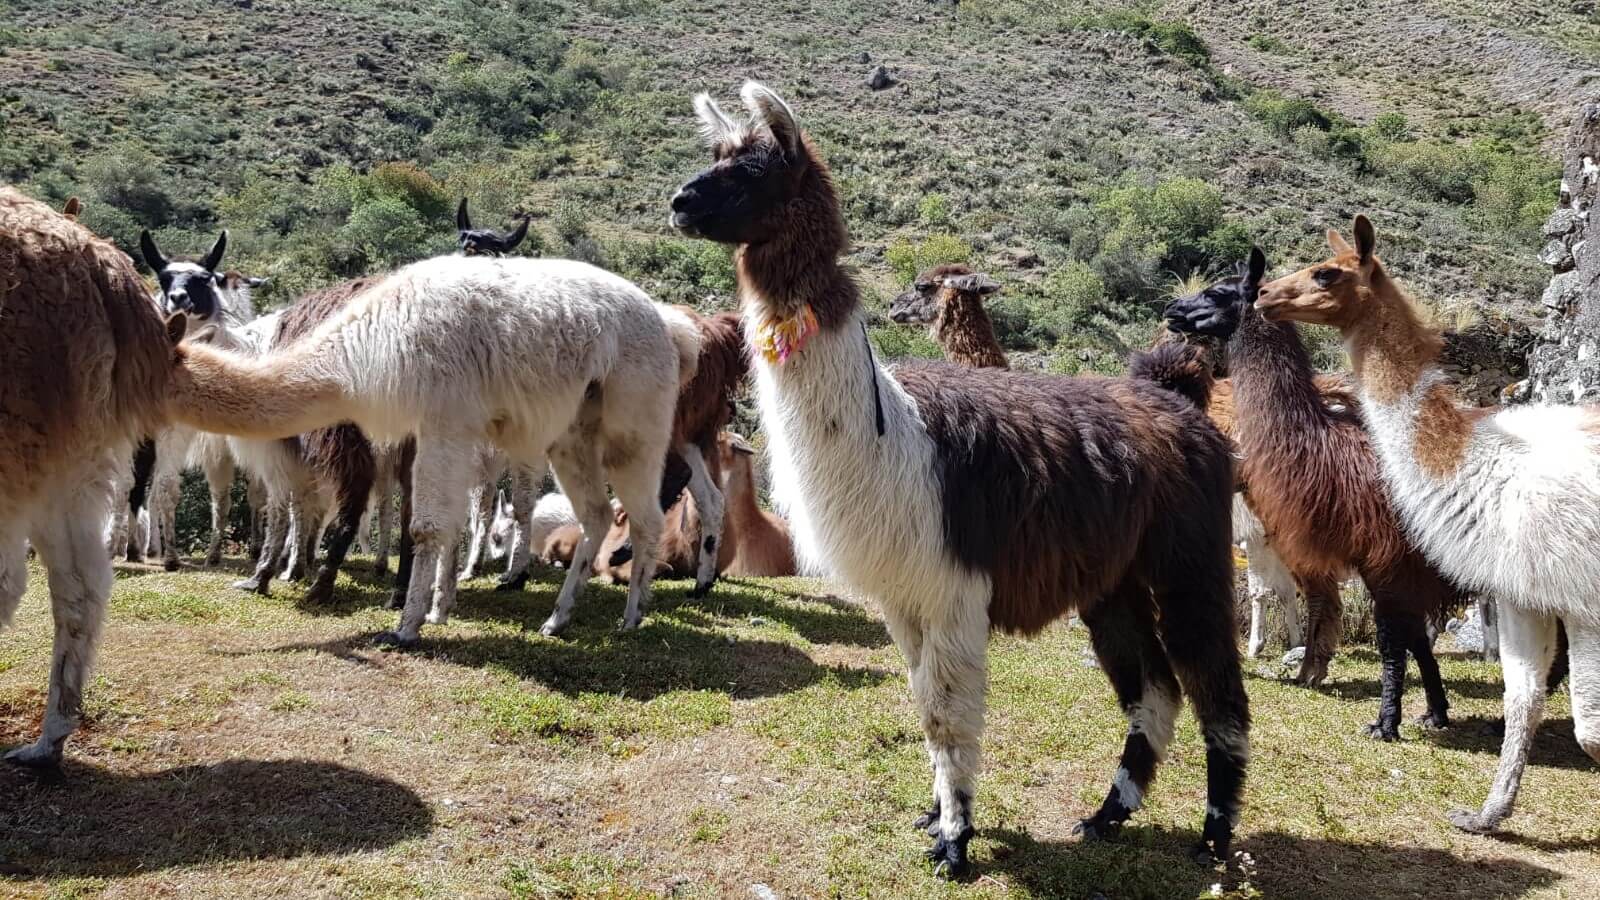 Llama herd in the Andes